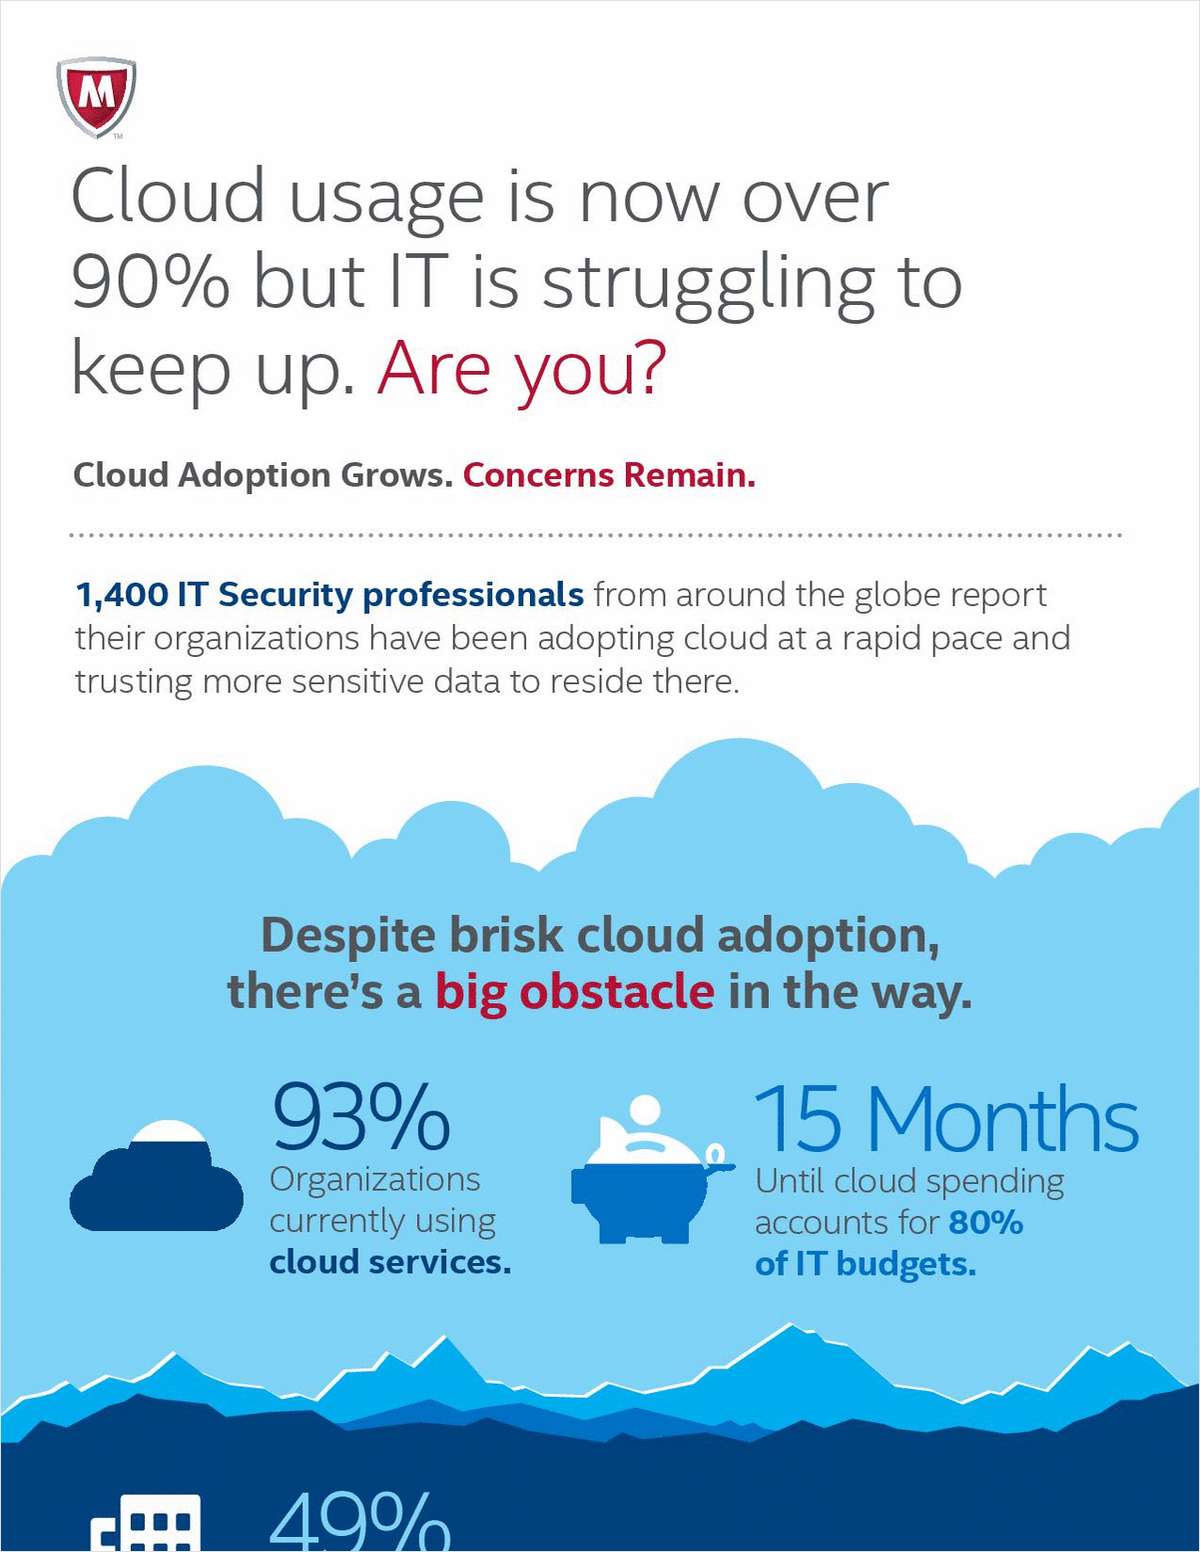 Cloud usage is now over 90% but IT is struggling to keep up. Are you?